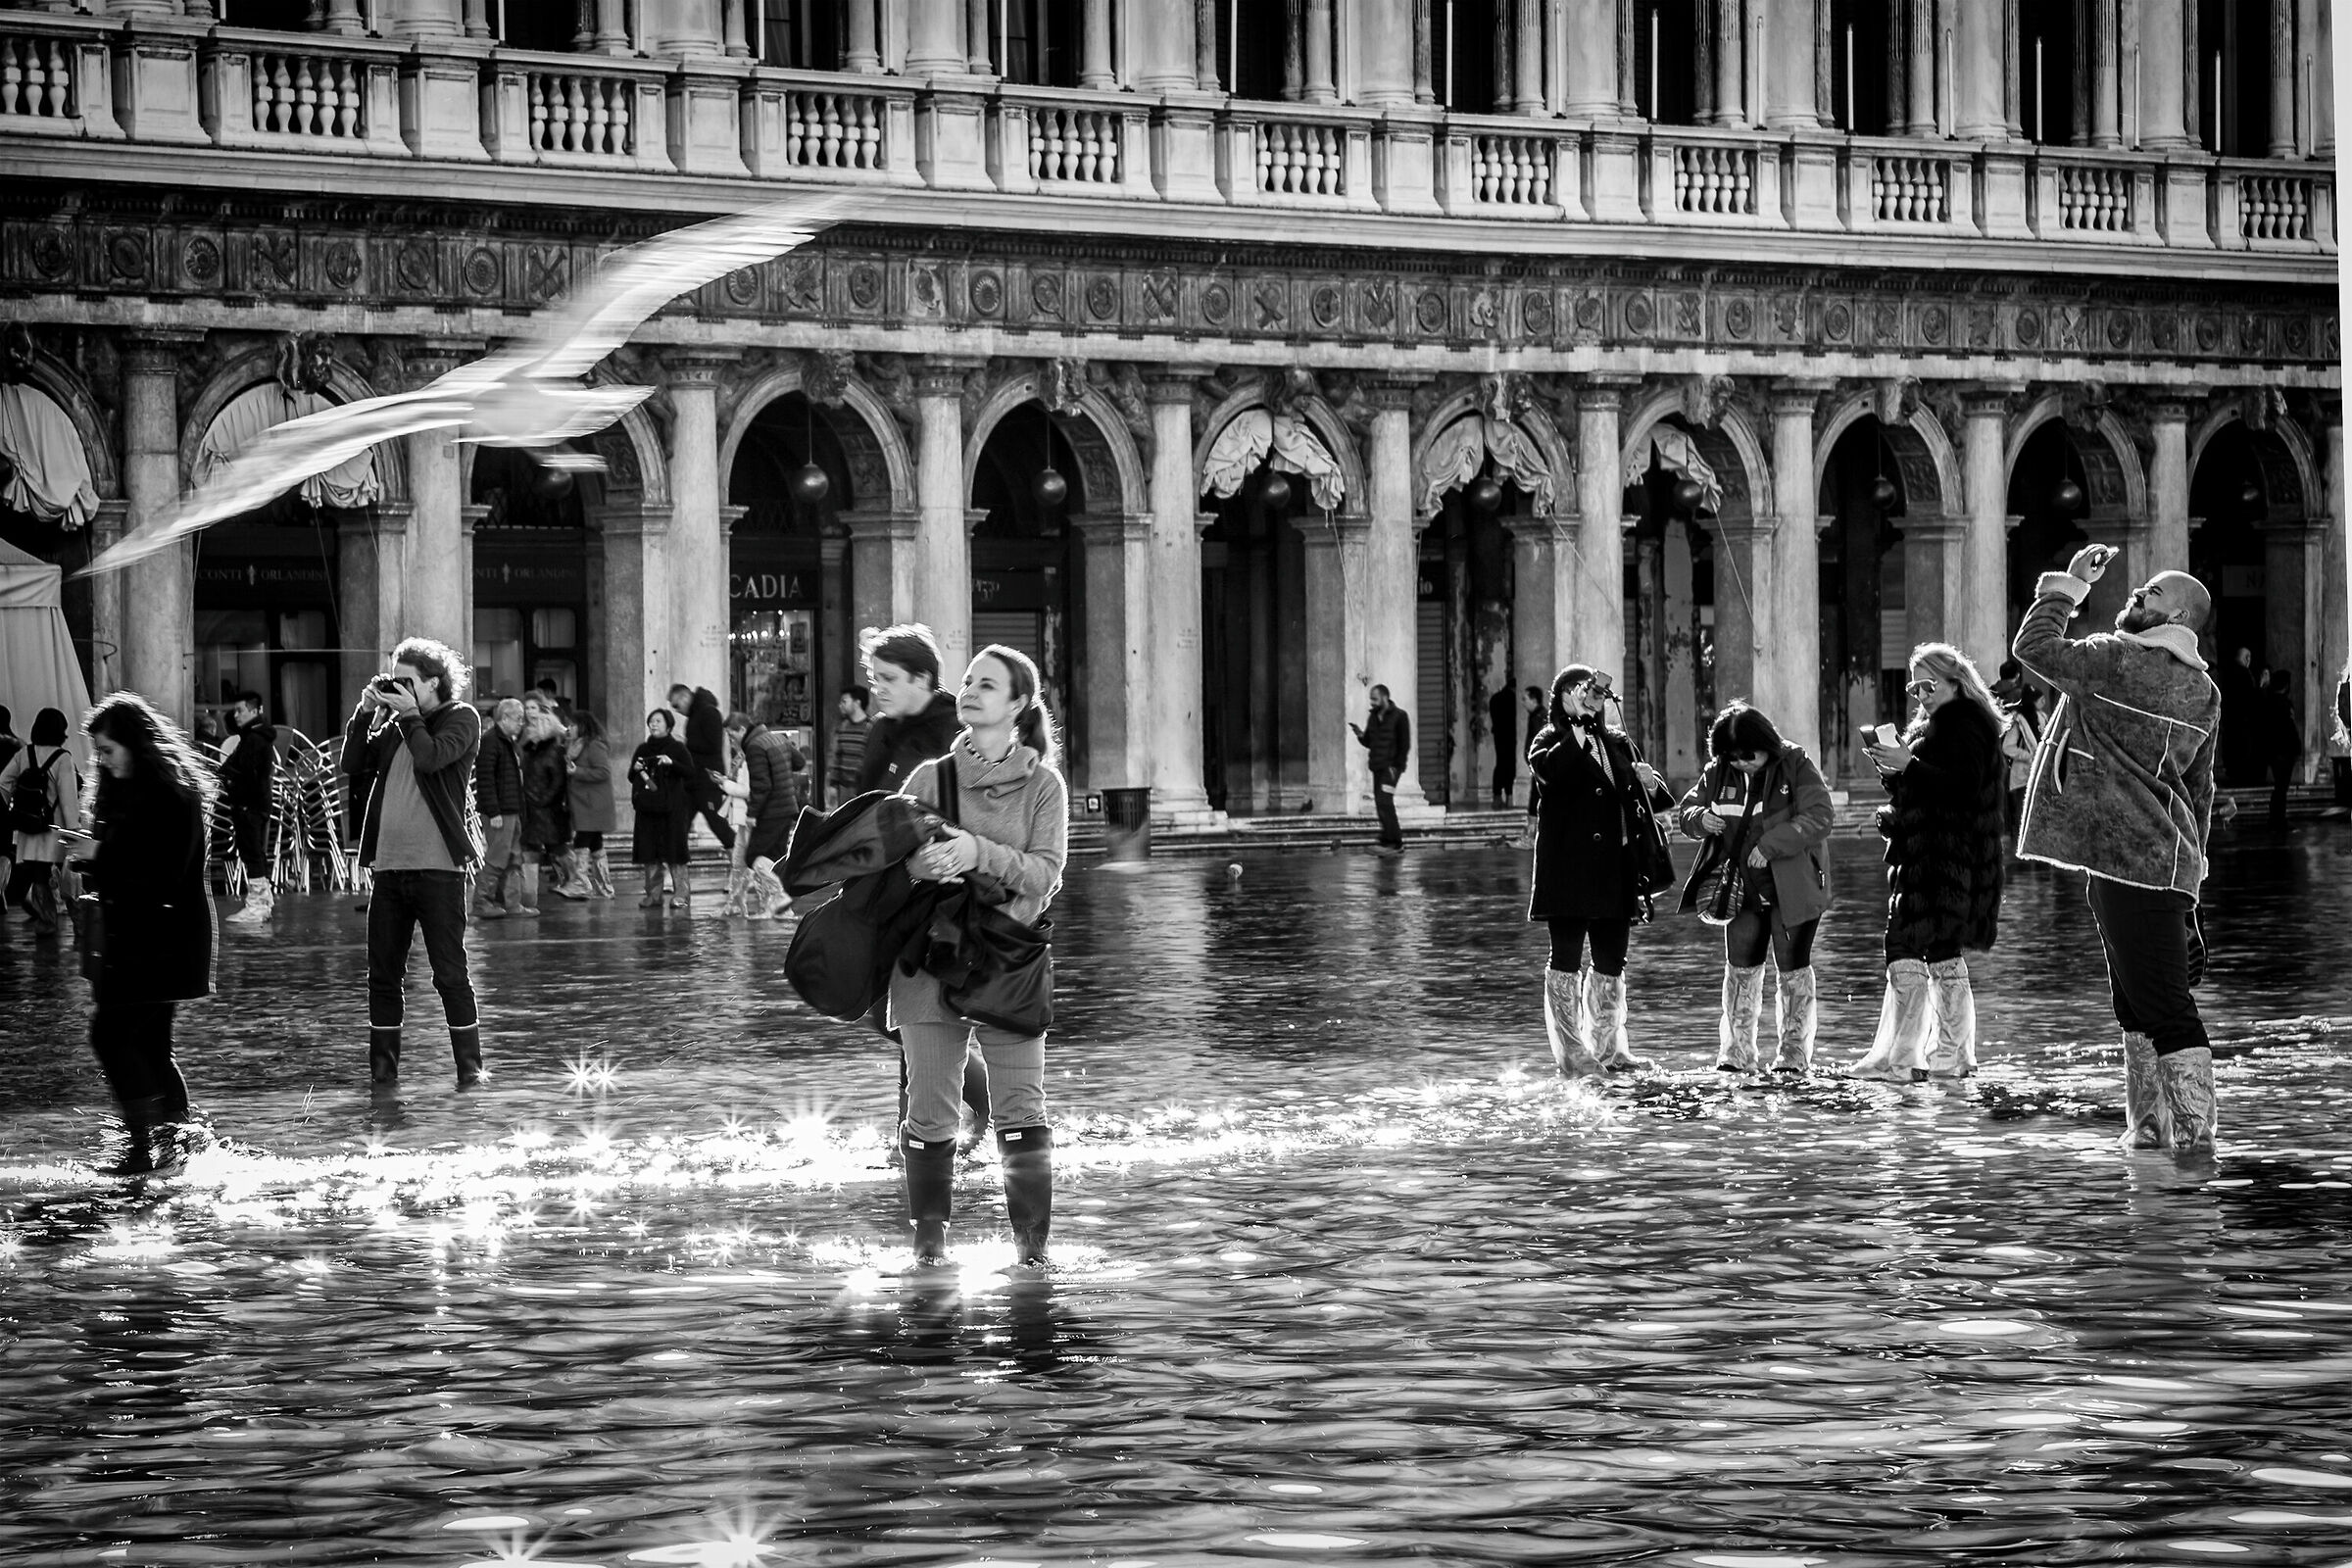 High water in St. Mark's Square in Venice...